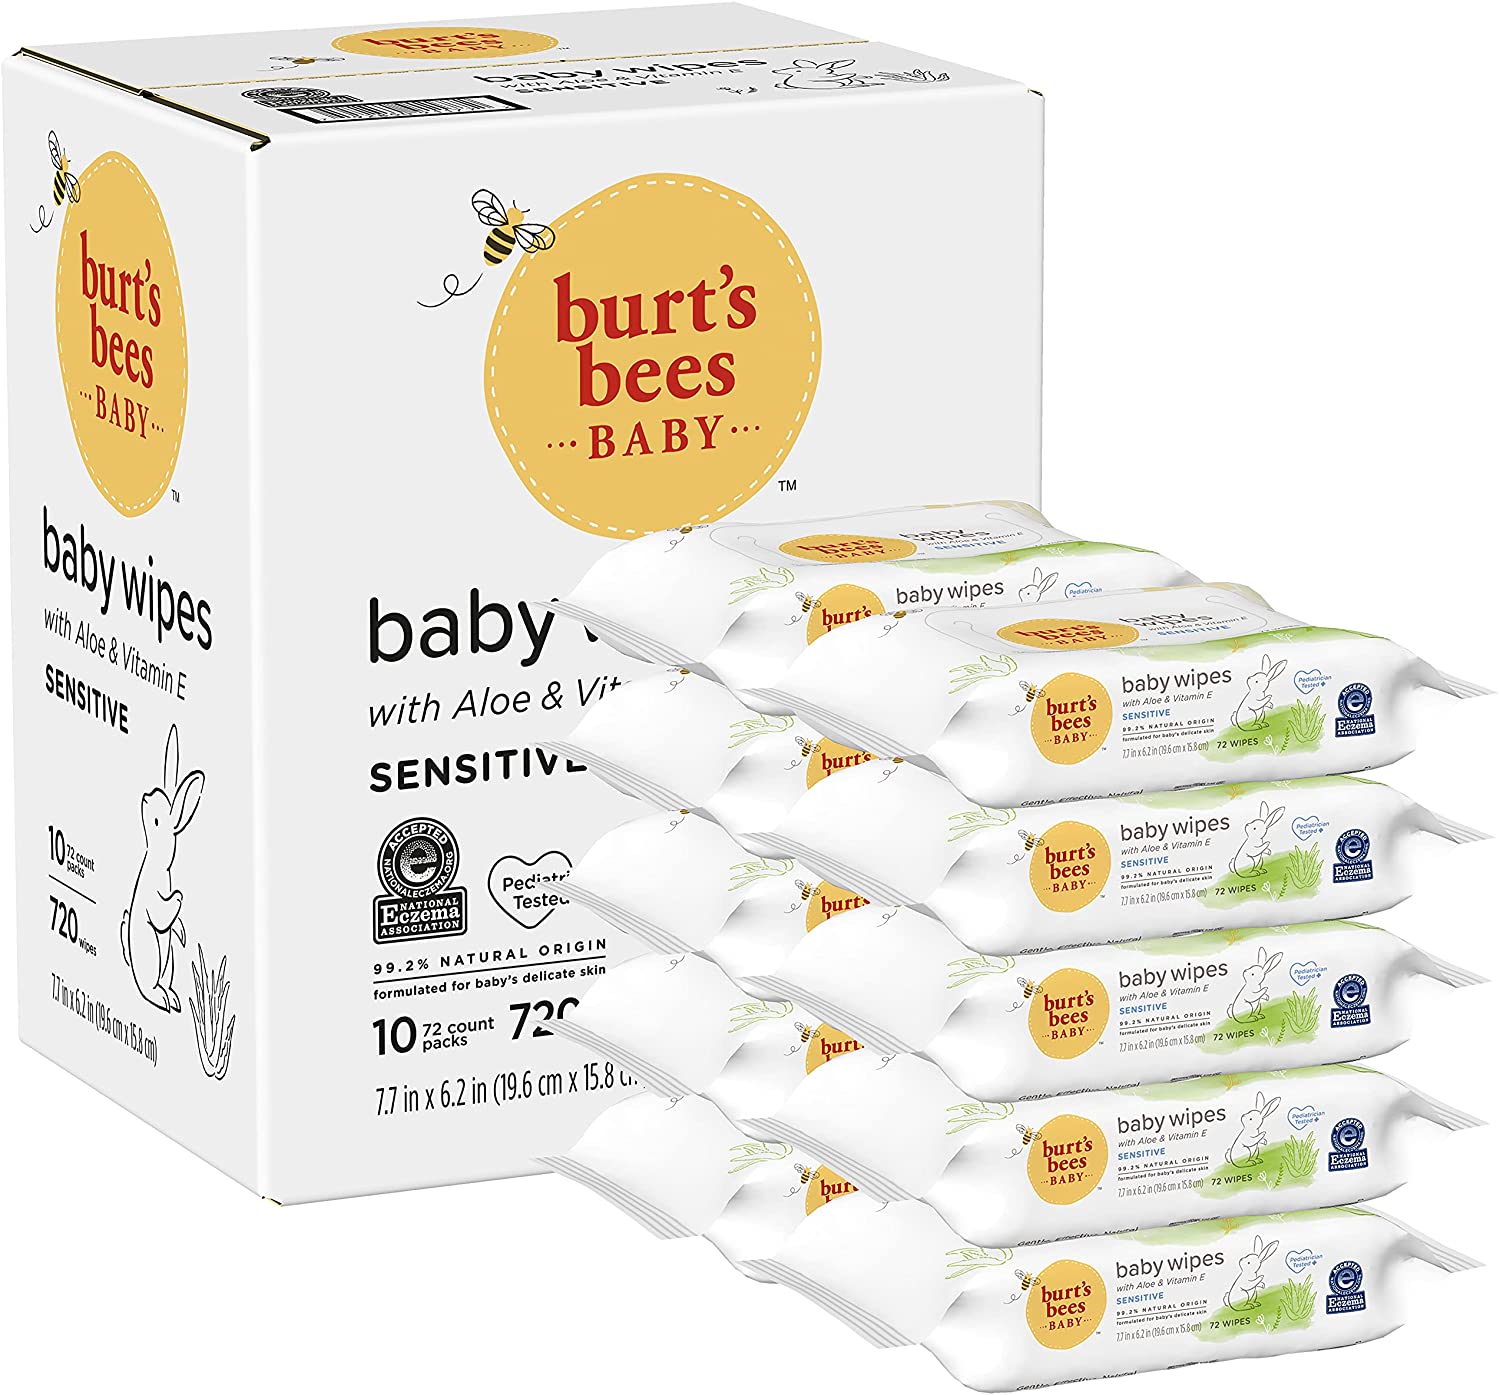 Burt's Bees unscented natural baby wipes for sensitive skin